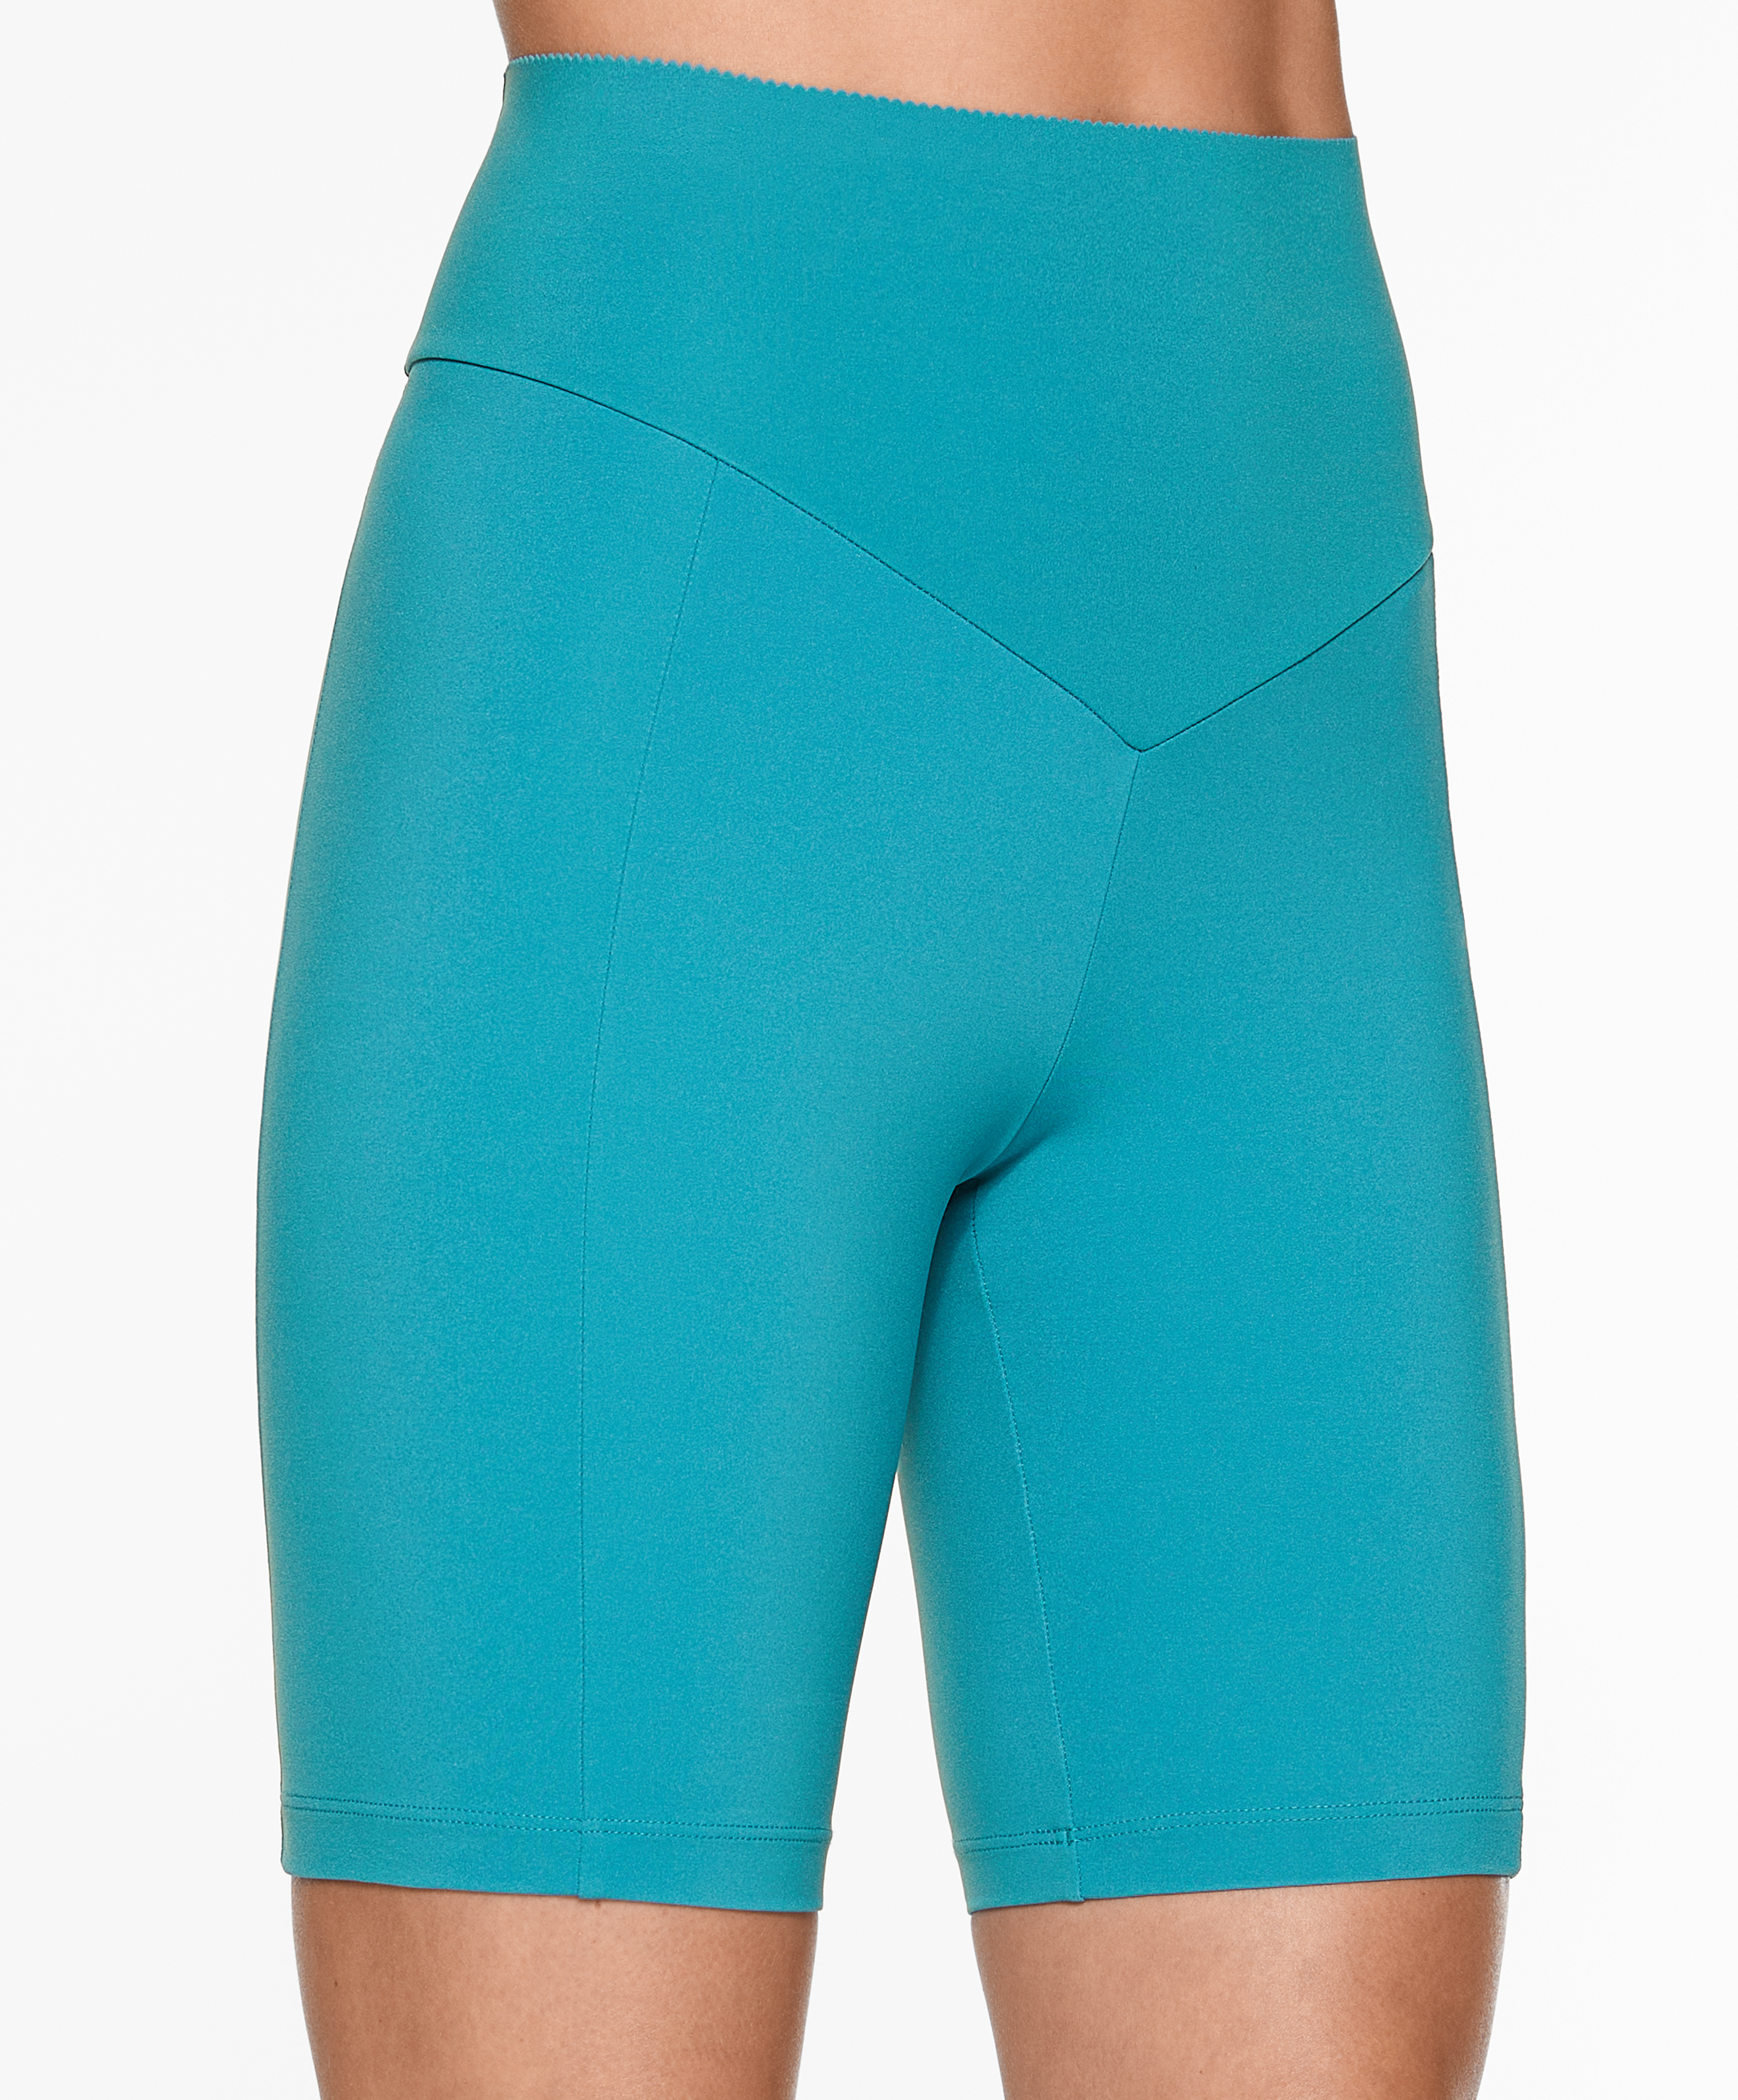 Shaping slimming leggings PUSH UP HYPNOTIZE K130 turquoise MITARE Size XS  Color Turquoise